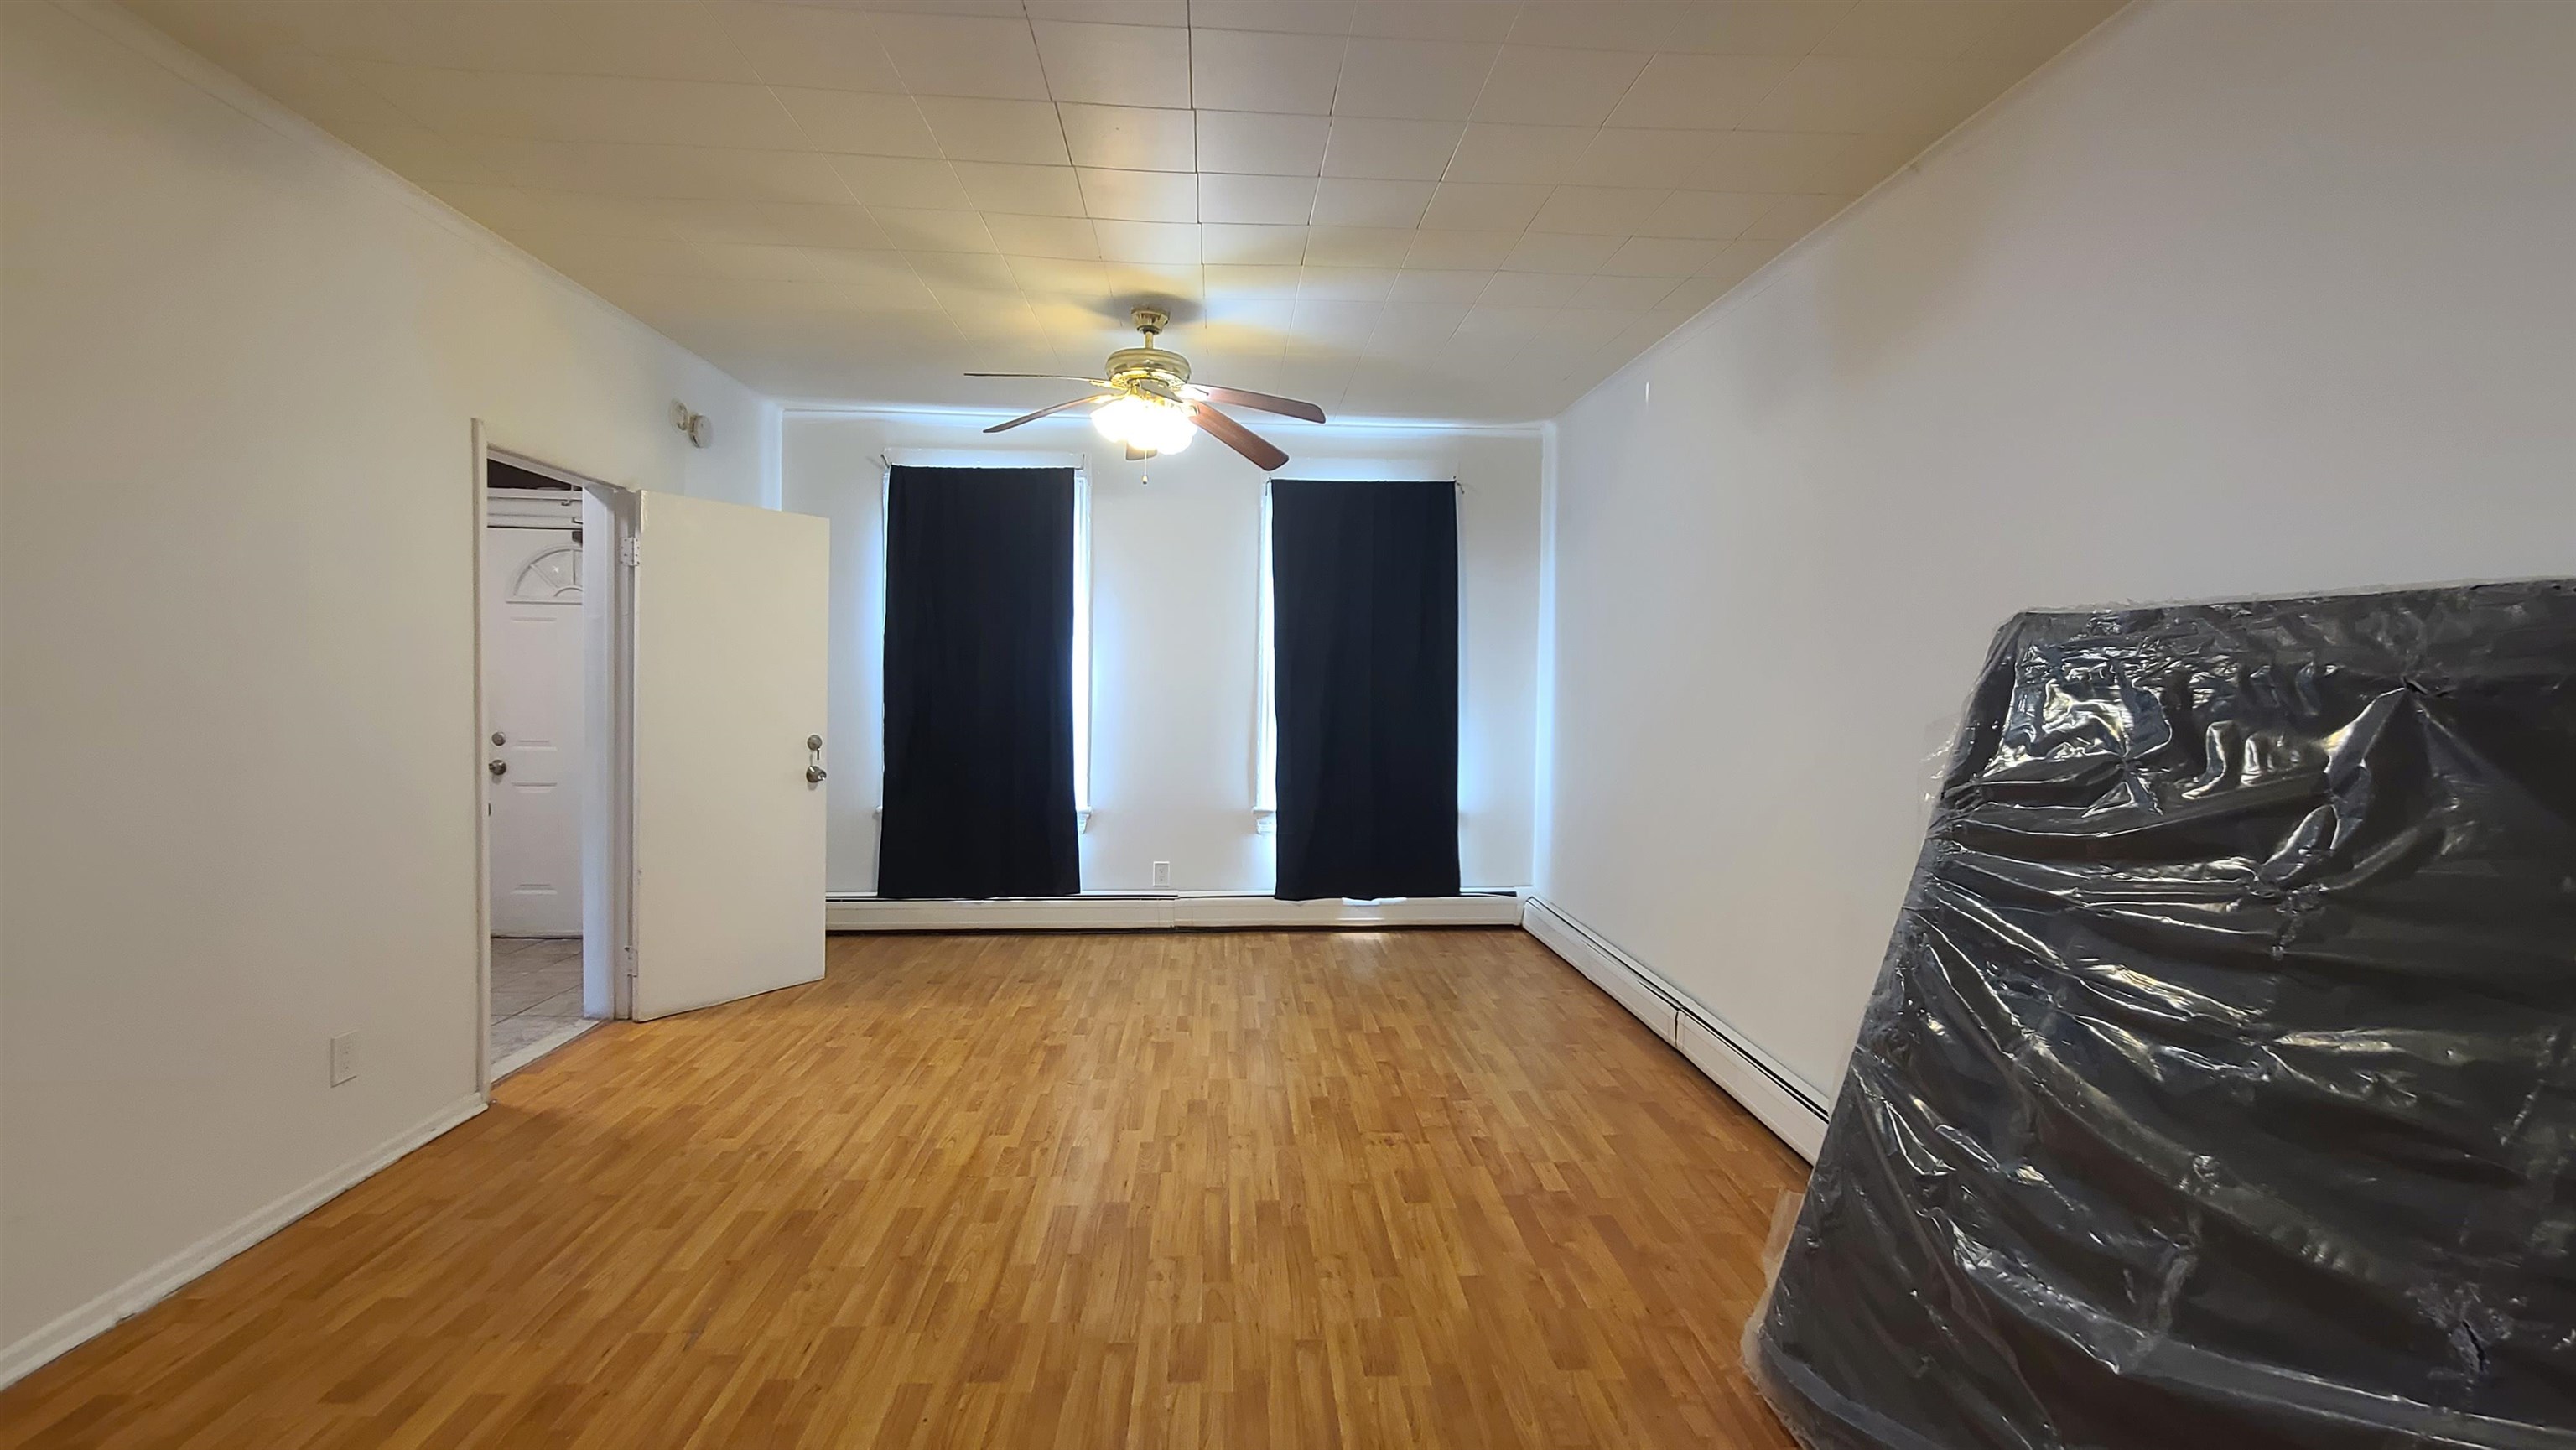 # 240008898 - For Rent in JERSEY CITY - Greenville NJ